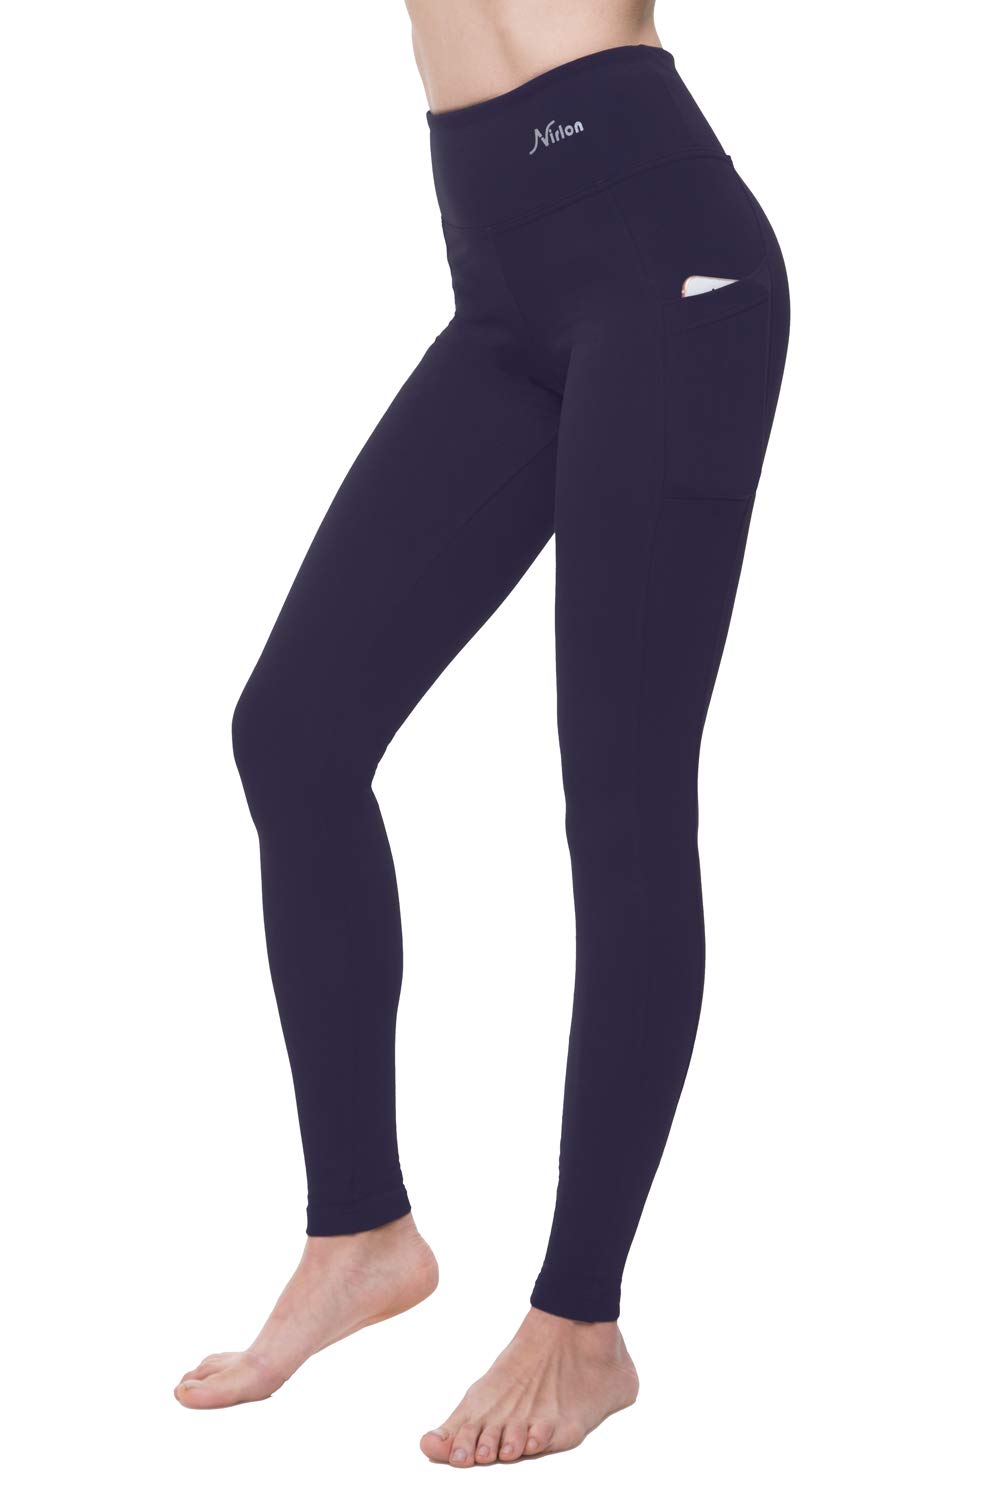 Nirlon Yoga Pants with Pockets - Yoga Pants with Pockets for Women